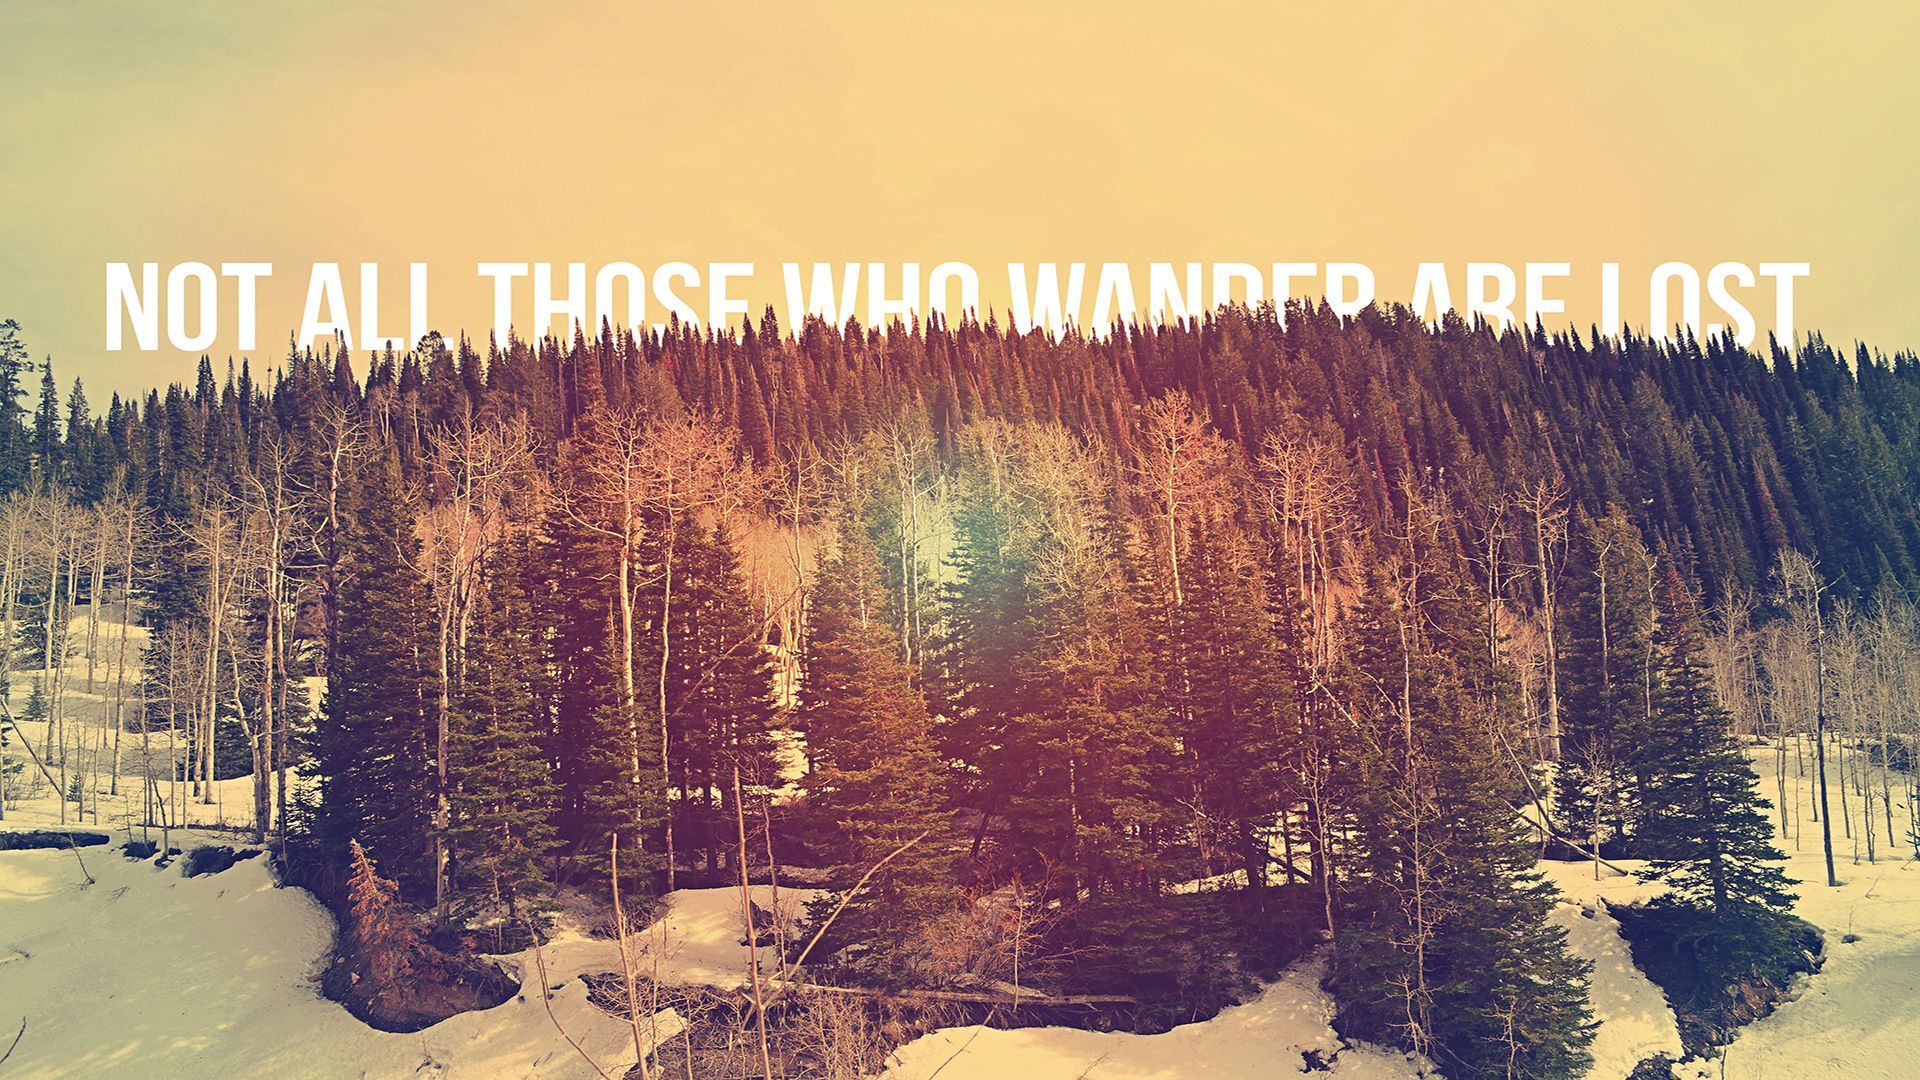 Not All Those Who Wander Are Lost [1920x1080]